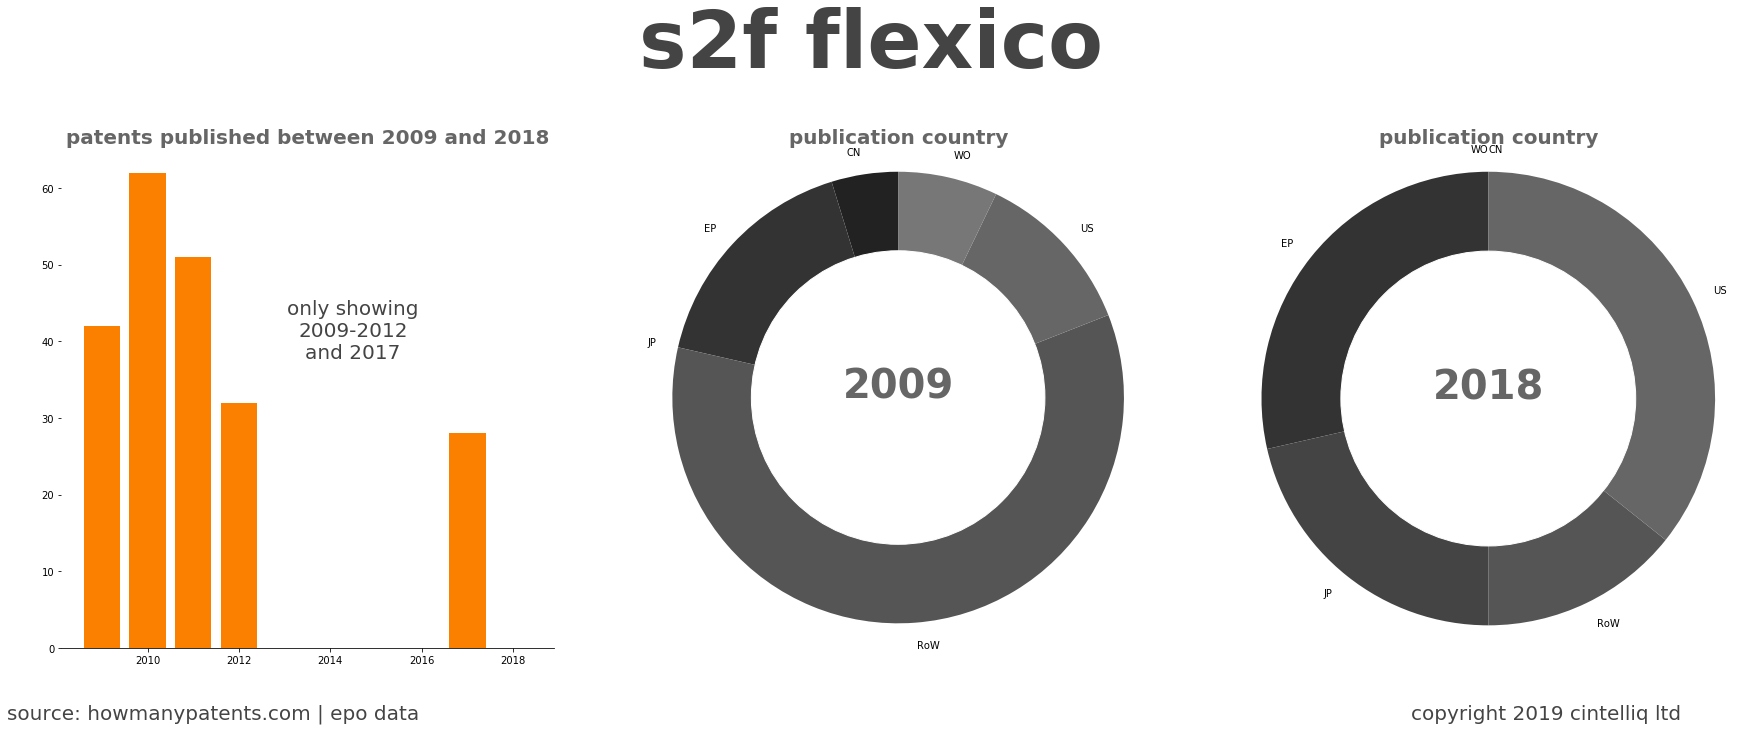 summary of patents for S2F Flexico